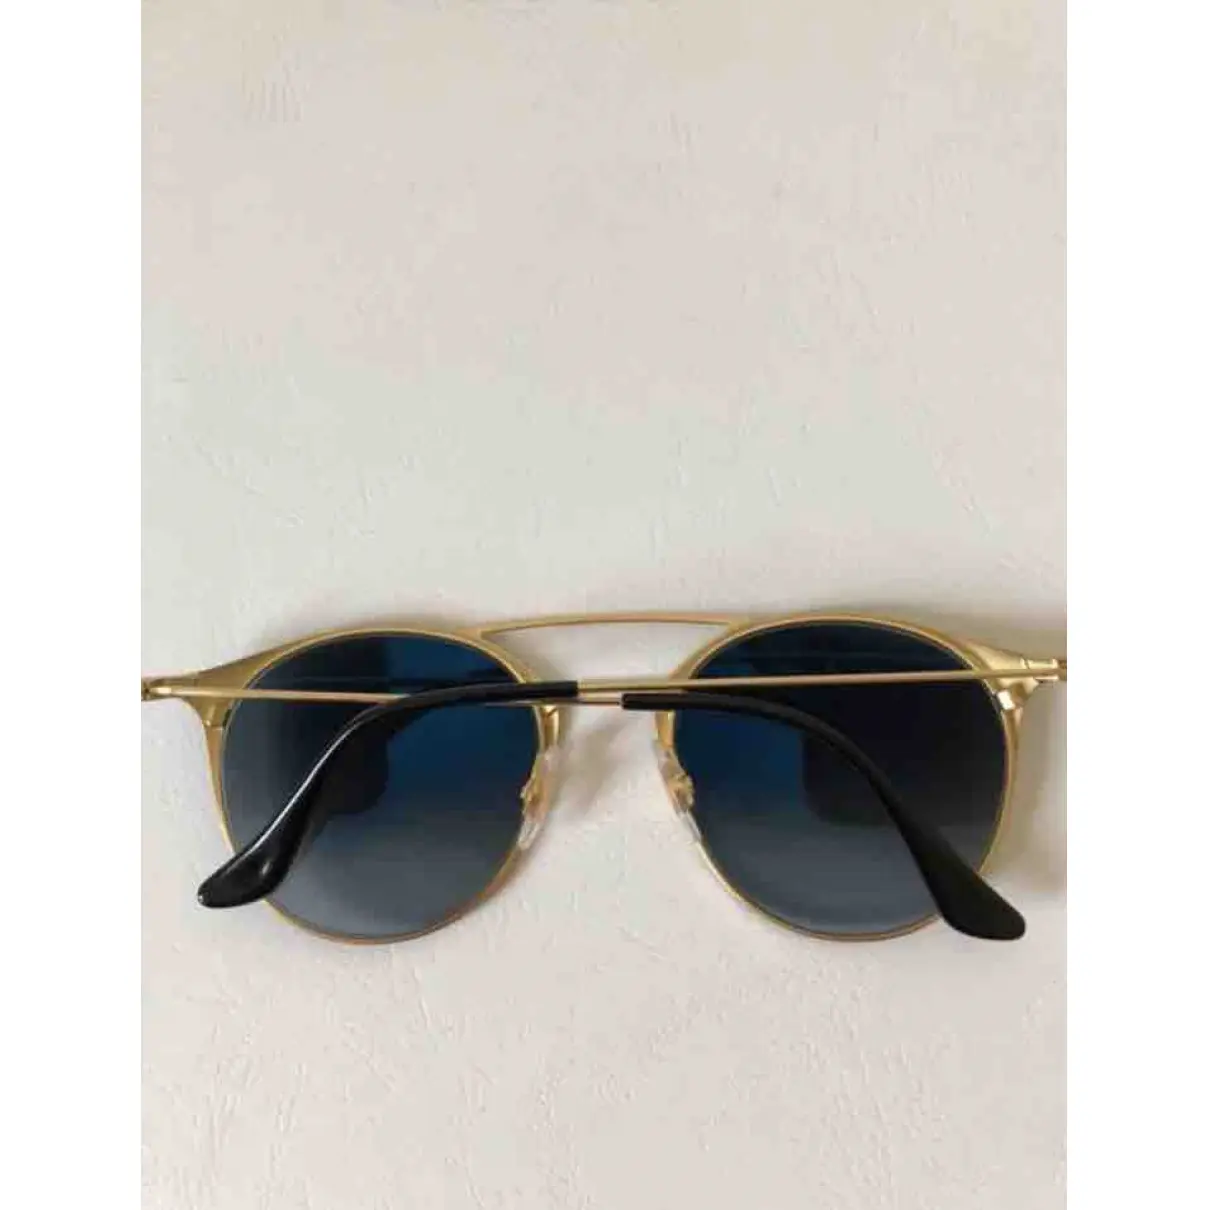 Buy Ray-Ban Oval sunglasses online